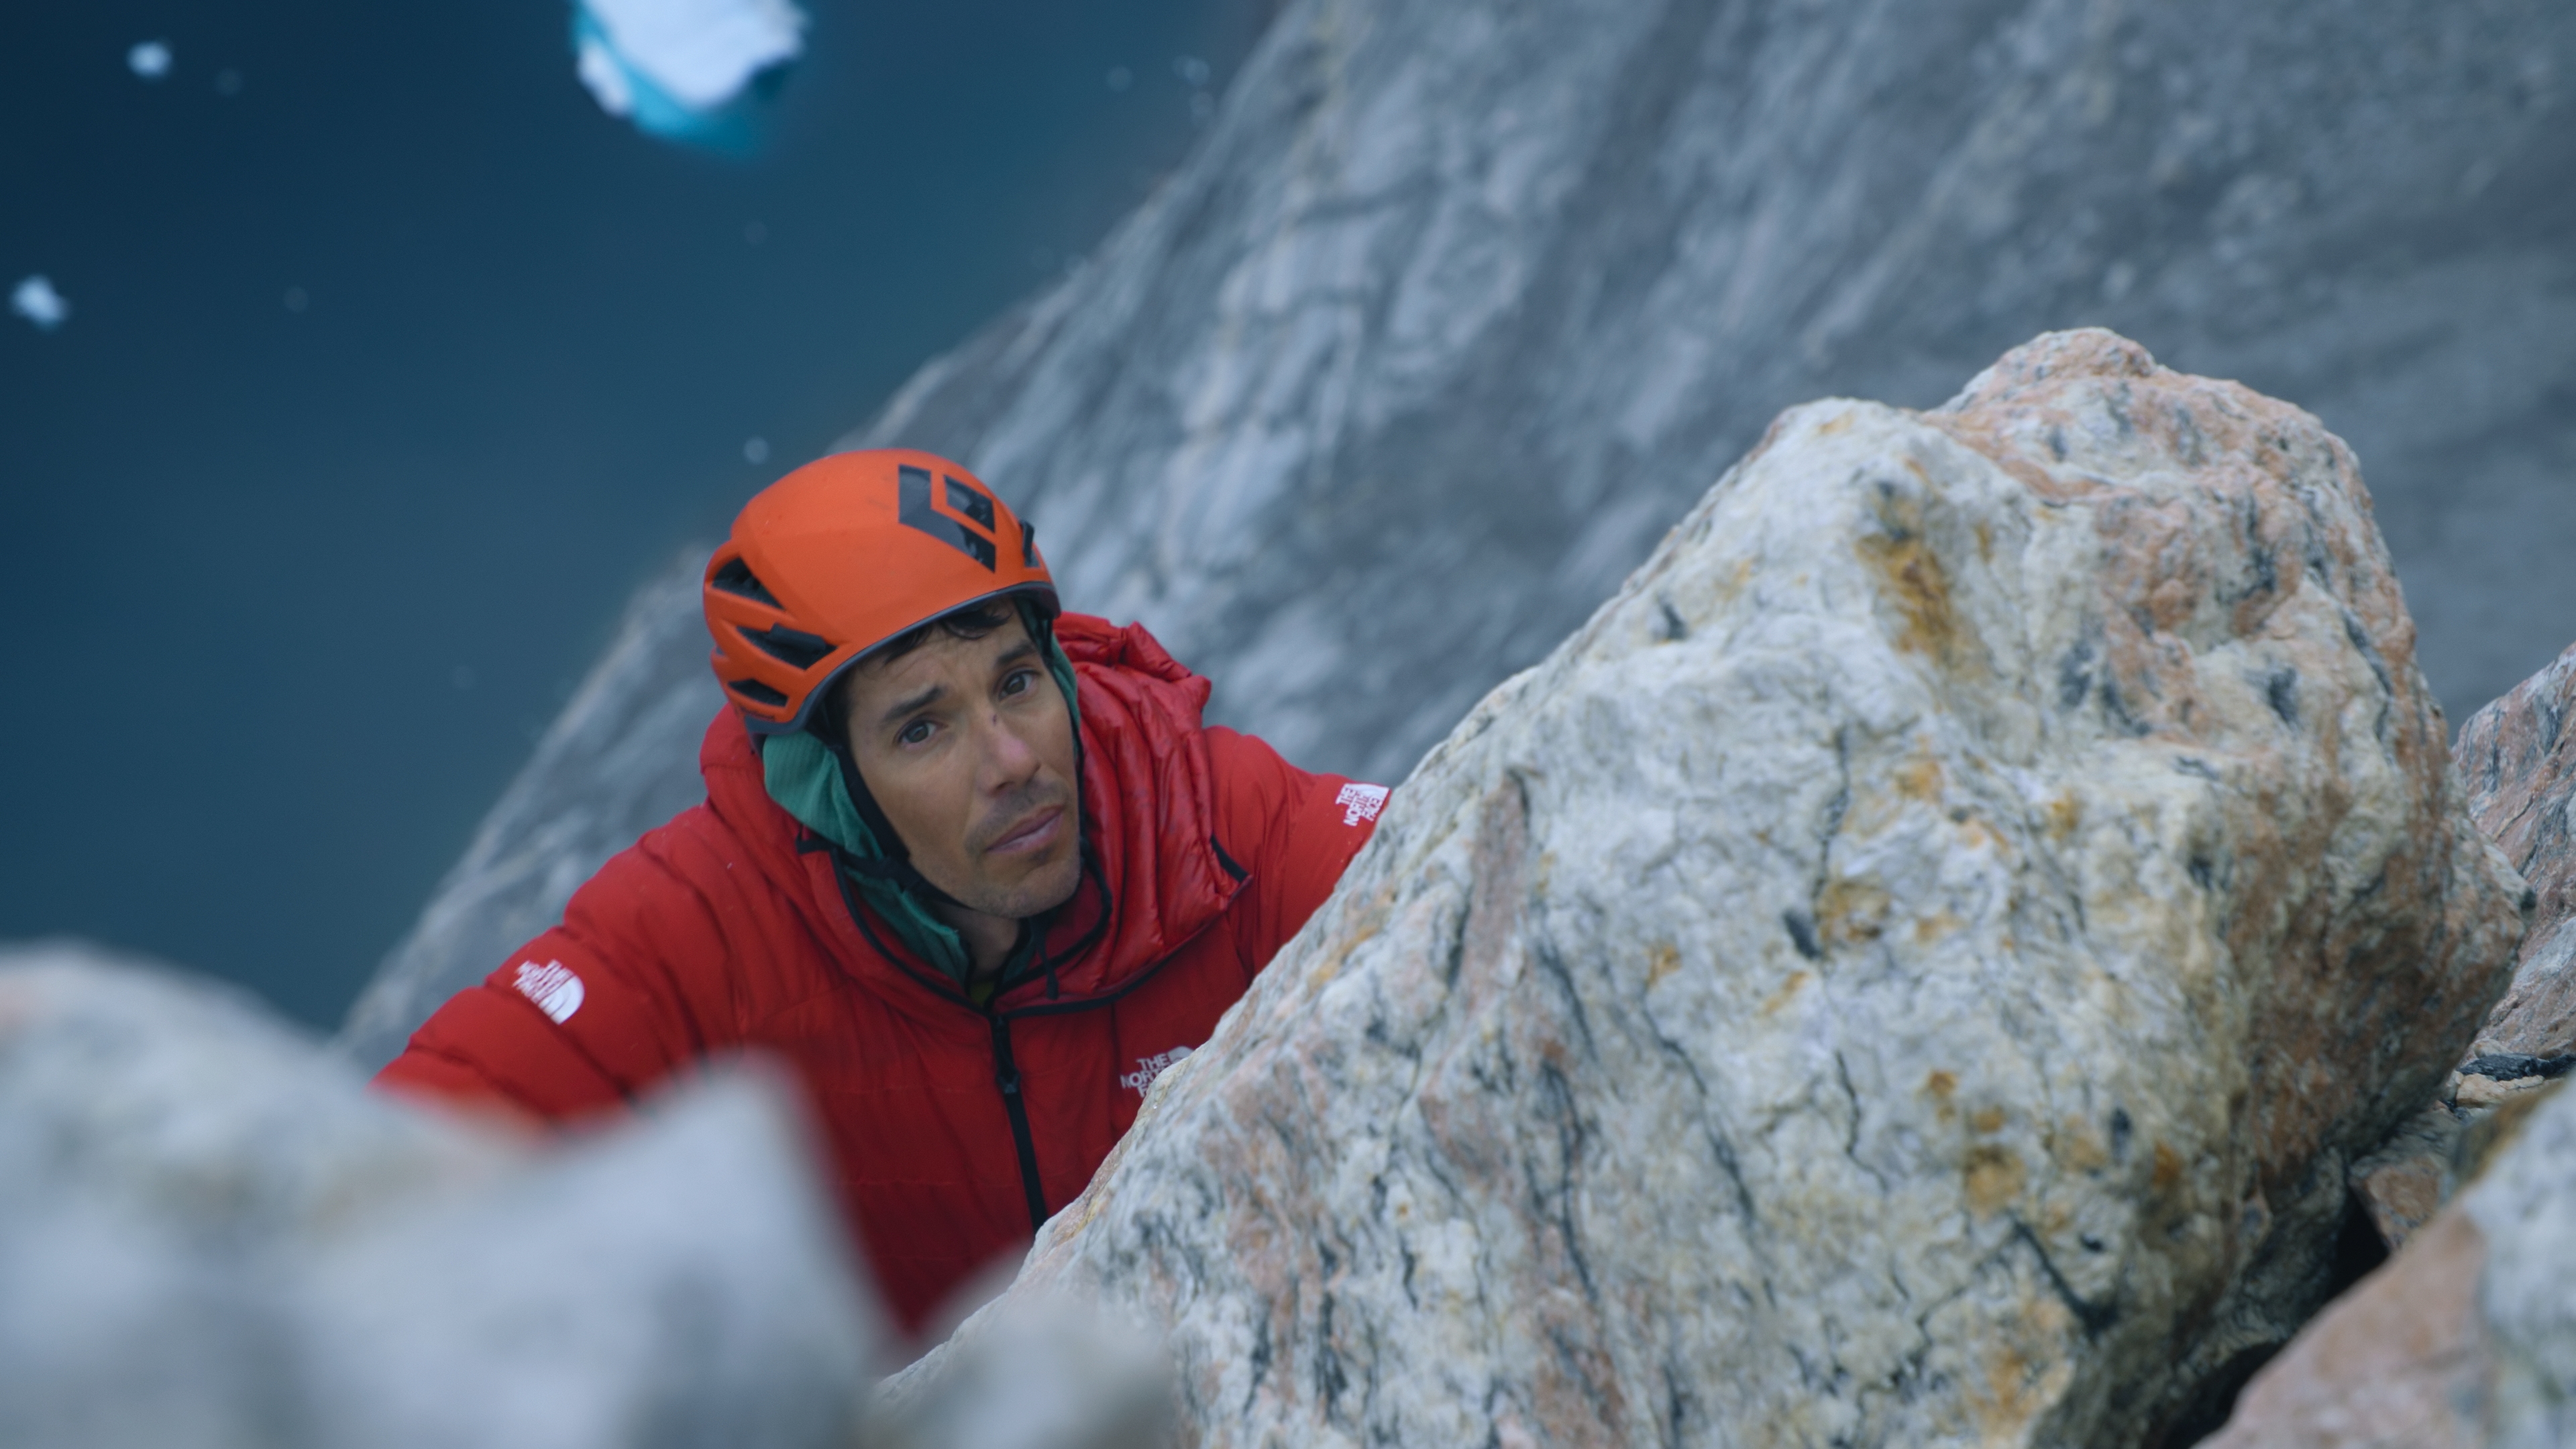 Alex has tackled a new 4,000ft cliff face in Greenland for his new series